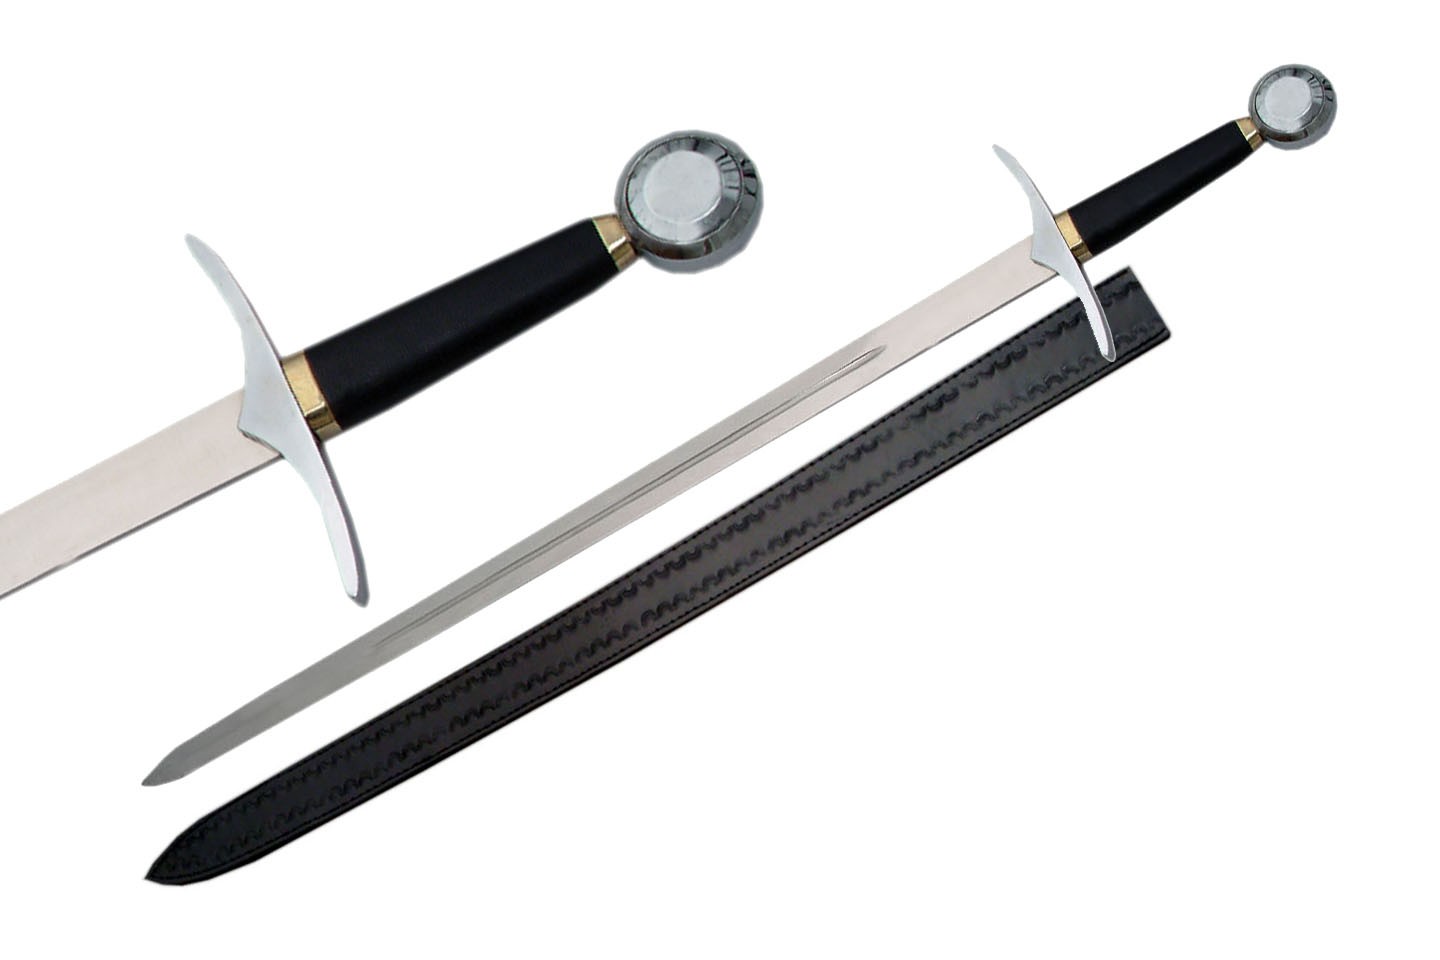 Medieval Long Sword 41.75in. Overall Silver Blade Knight Replica Reenactment